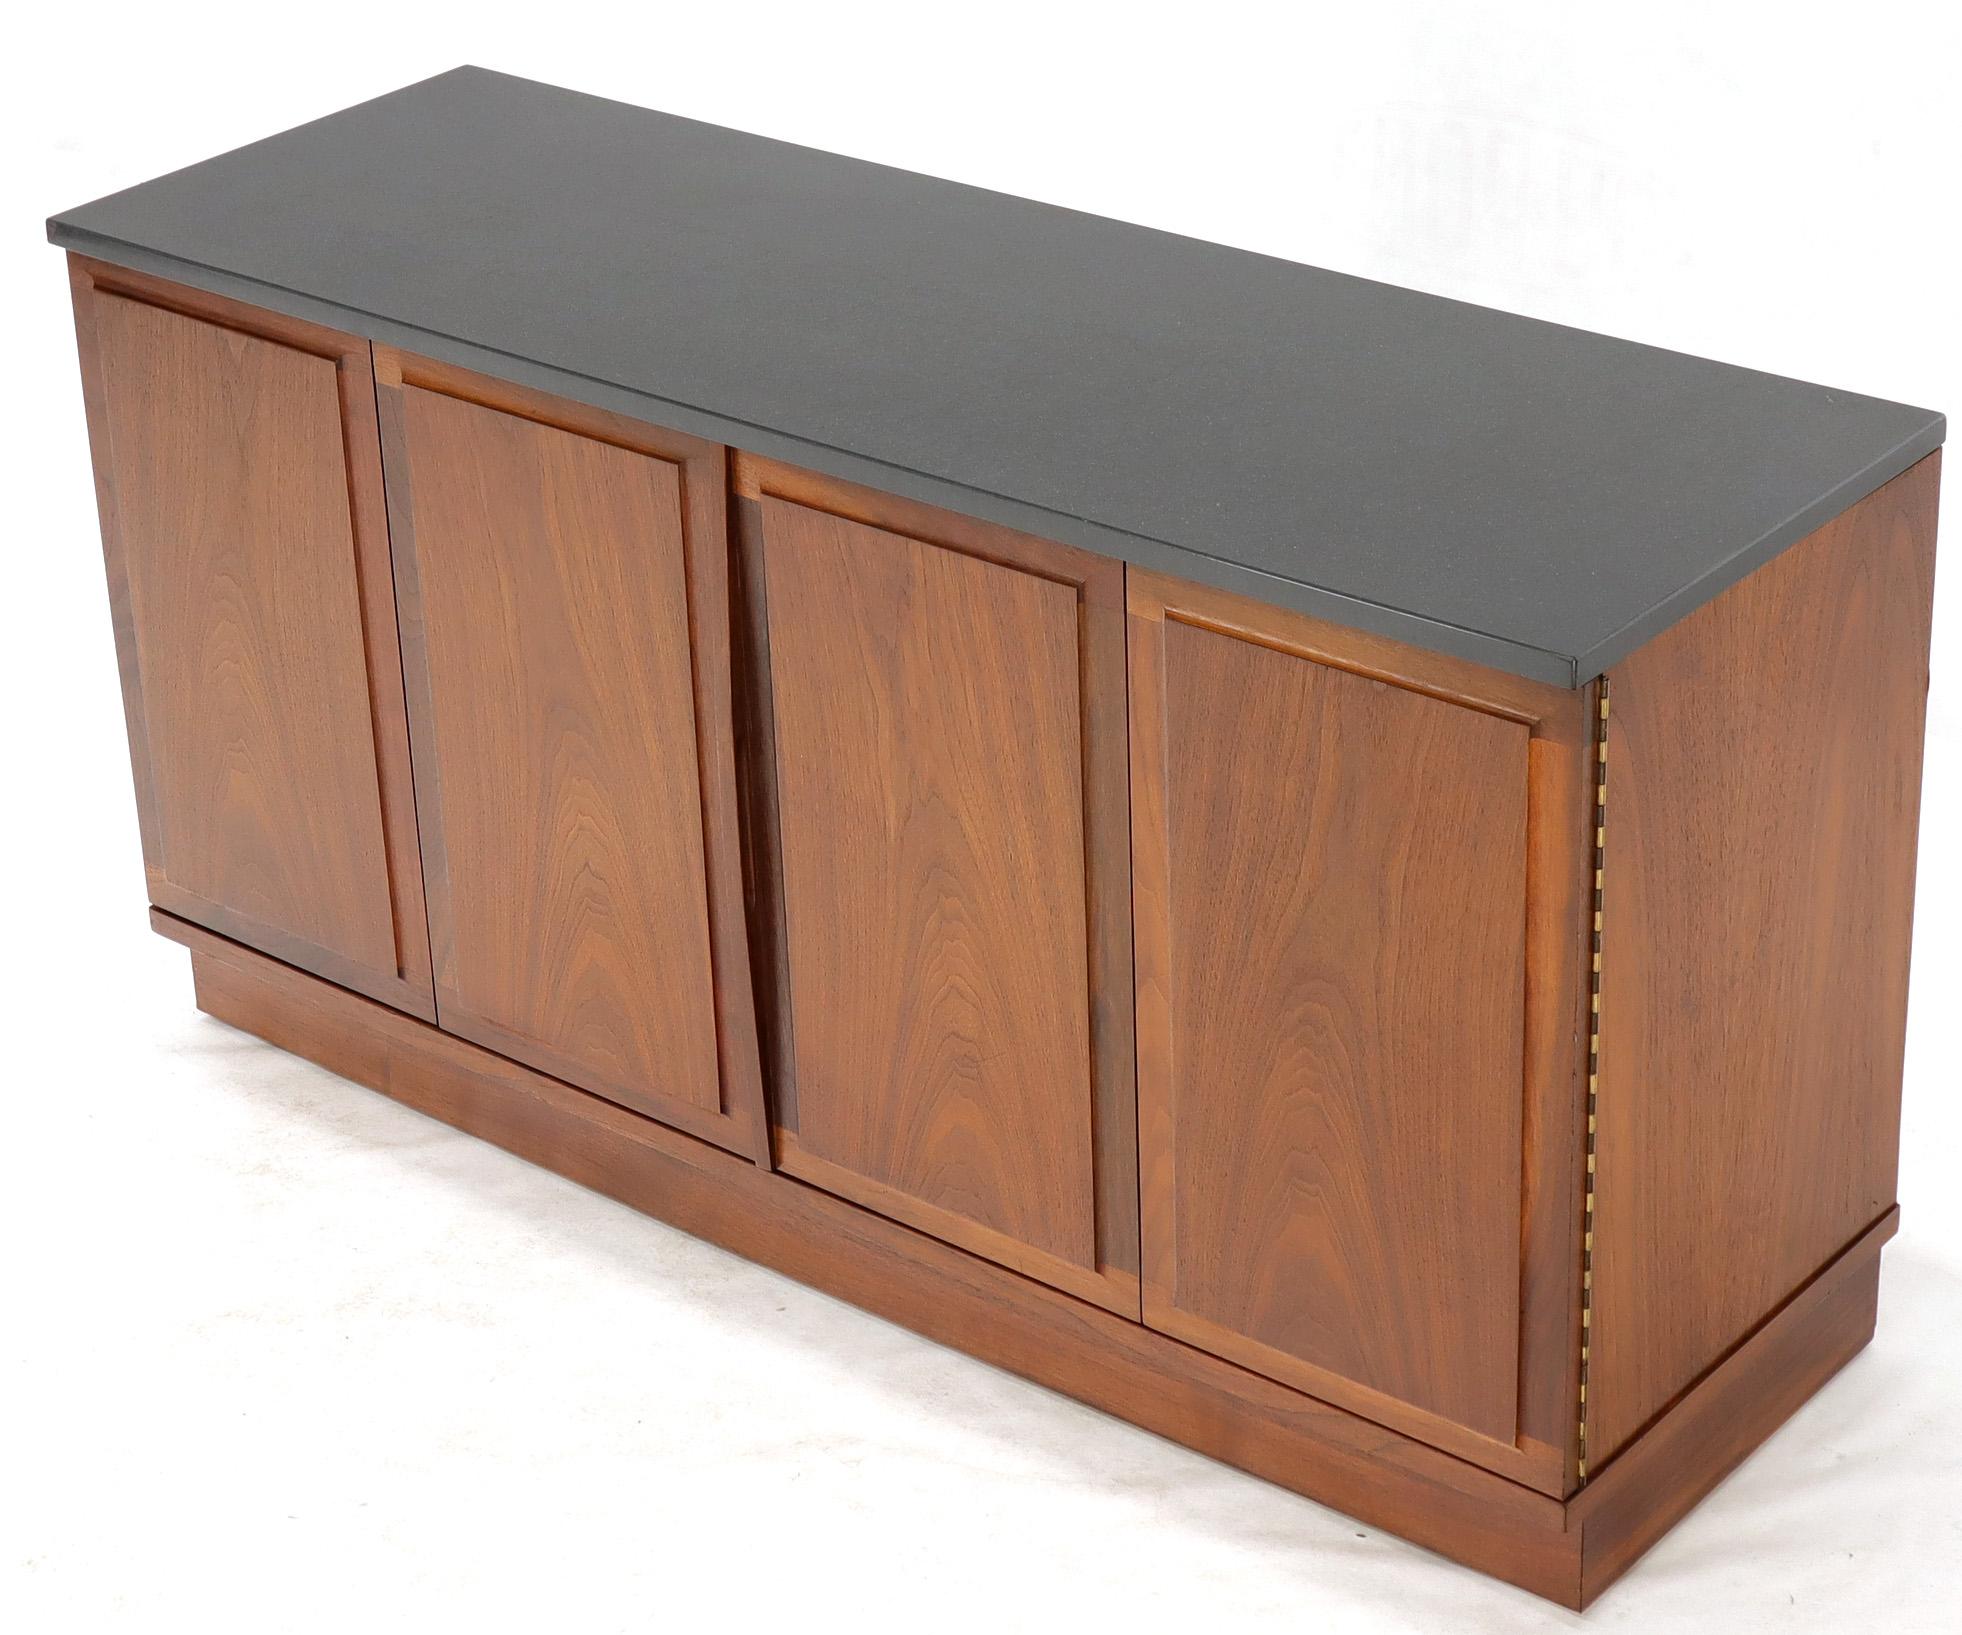 Mid-Century Modern double accordion doors walnut credenza storage cabinet with slate top. Dramatic vintage oiled walnut wood grain. Excellent condition. Milo Baughman influence.